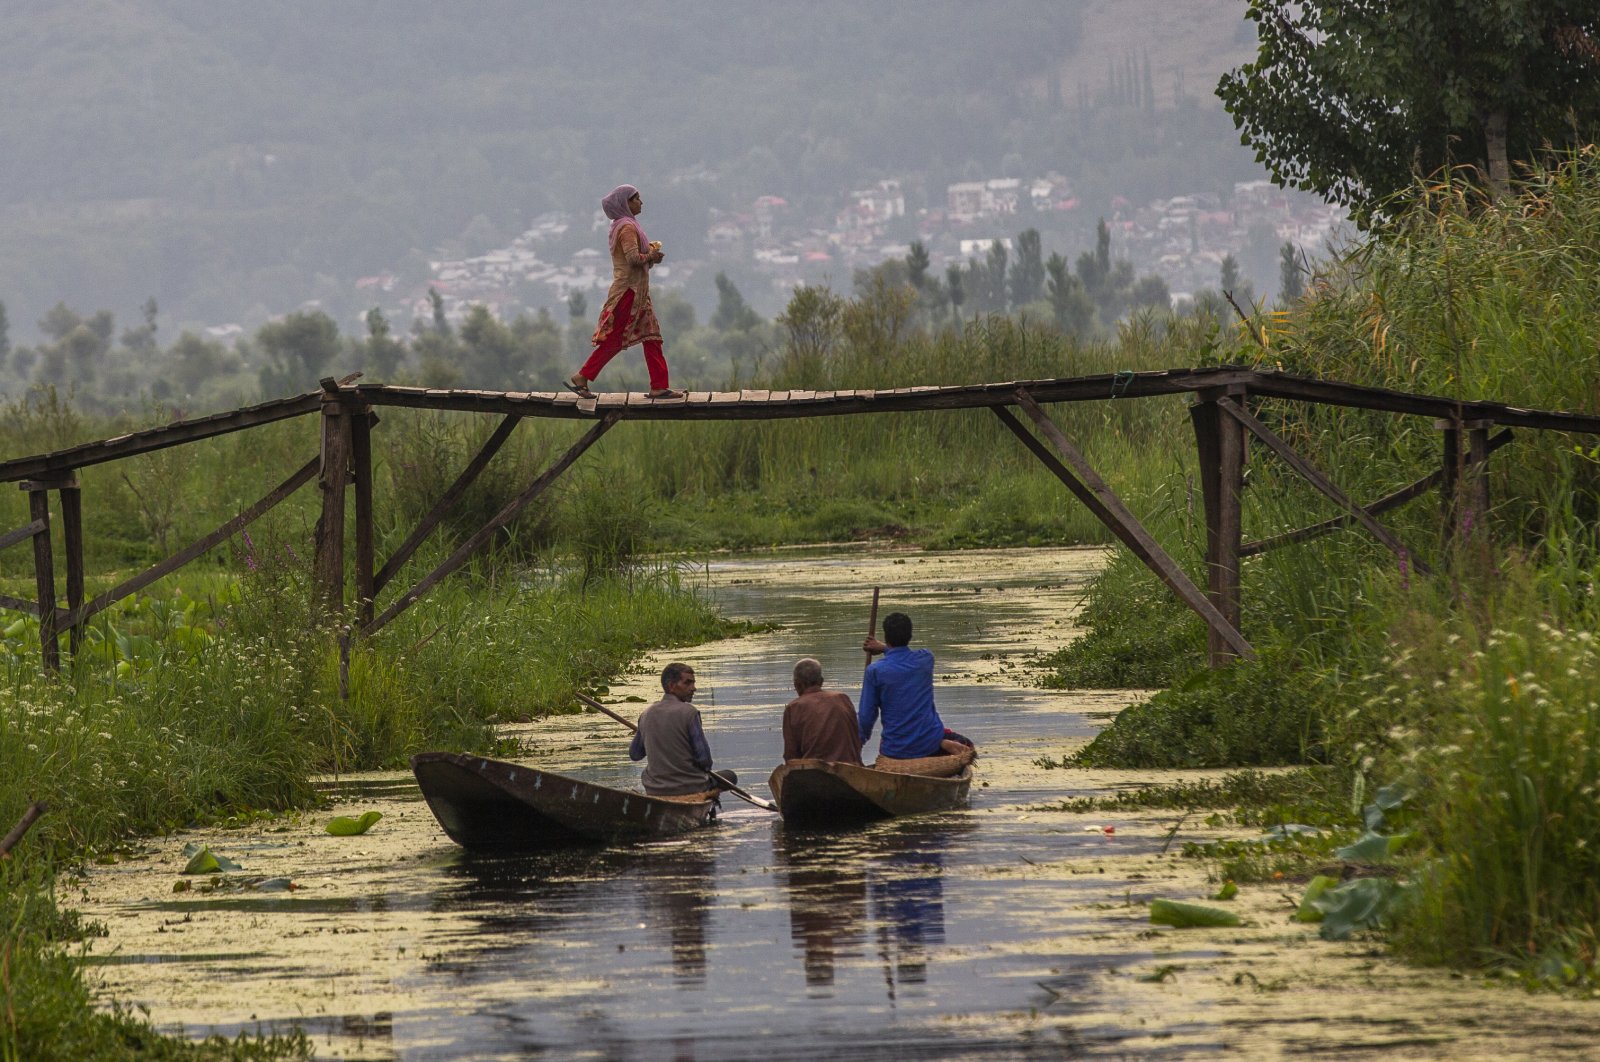 A Kashmiri woman walks back home after buying bread as men row their boat after selling their vegetables at the floating vegetable market on Dal Lake in Srinagar, Indian-occupied Kashmir, July 26, 2020. (AP Photo)